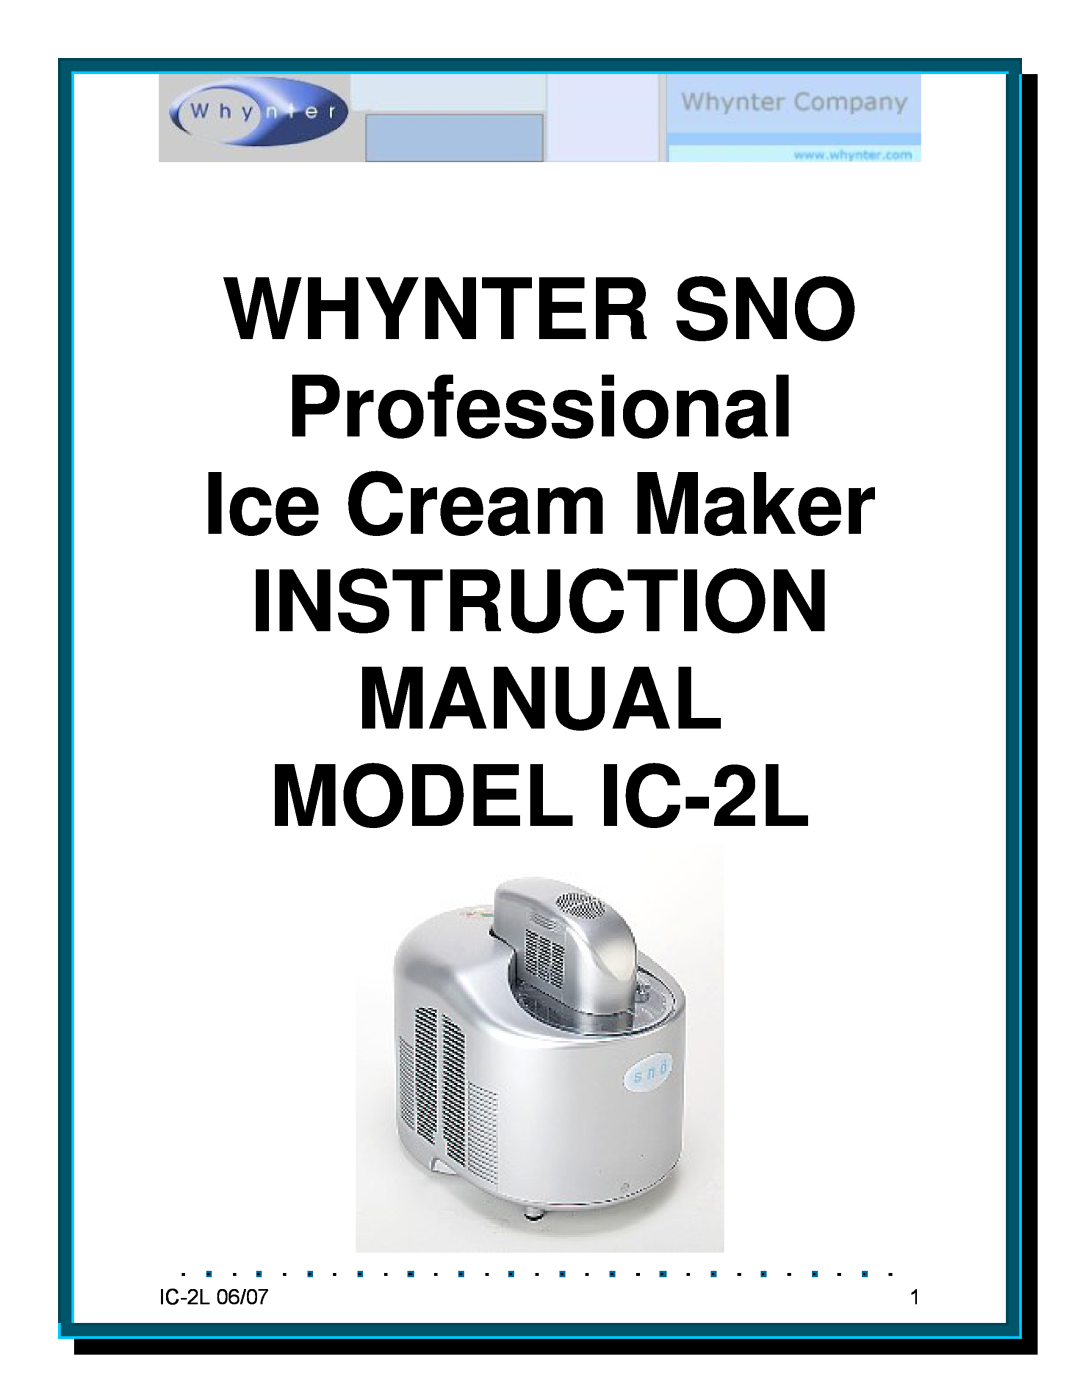 Whynter instruction manual Whynter Compressor Cooling Ice Cream Maker, MODEL# IC-2L 